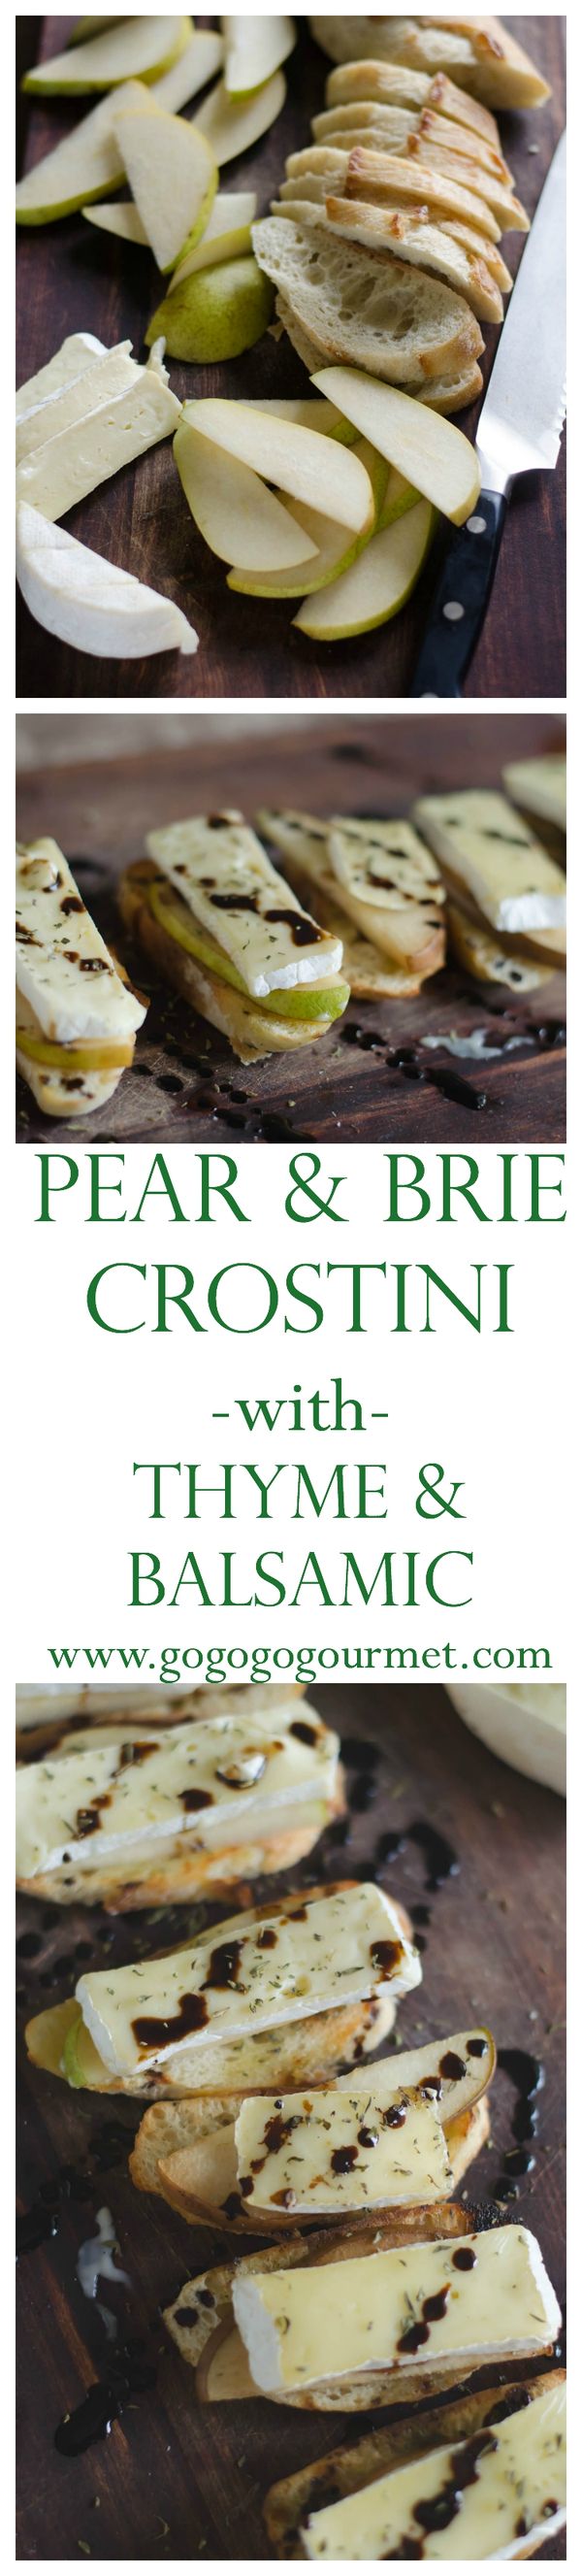 Pear and Brie Crostini with Balsamic and Thyme